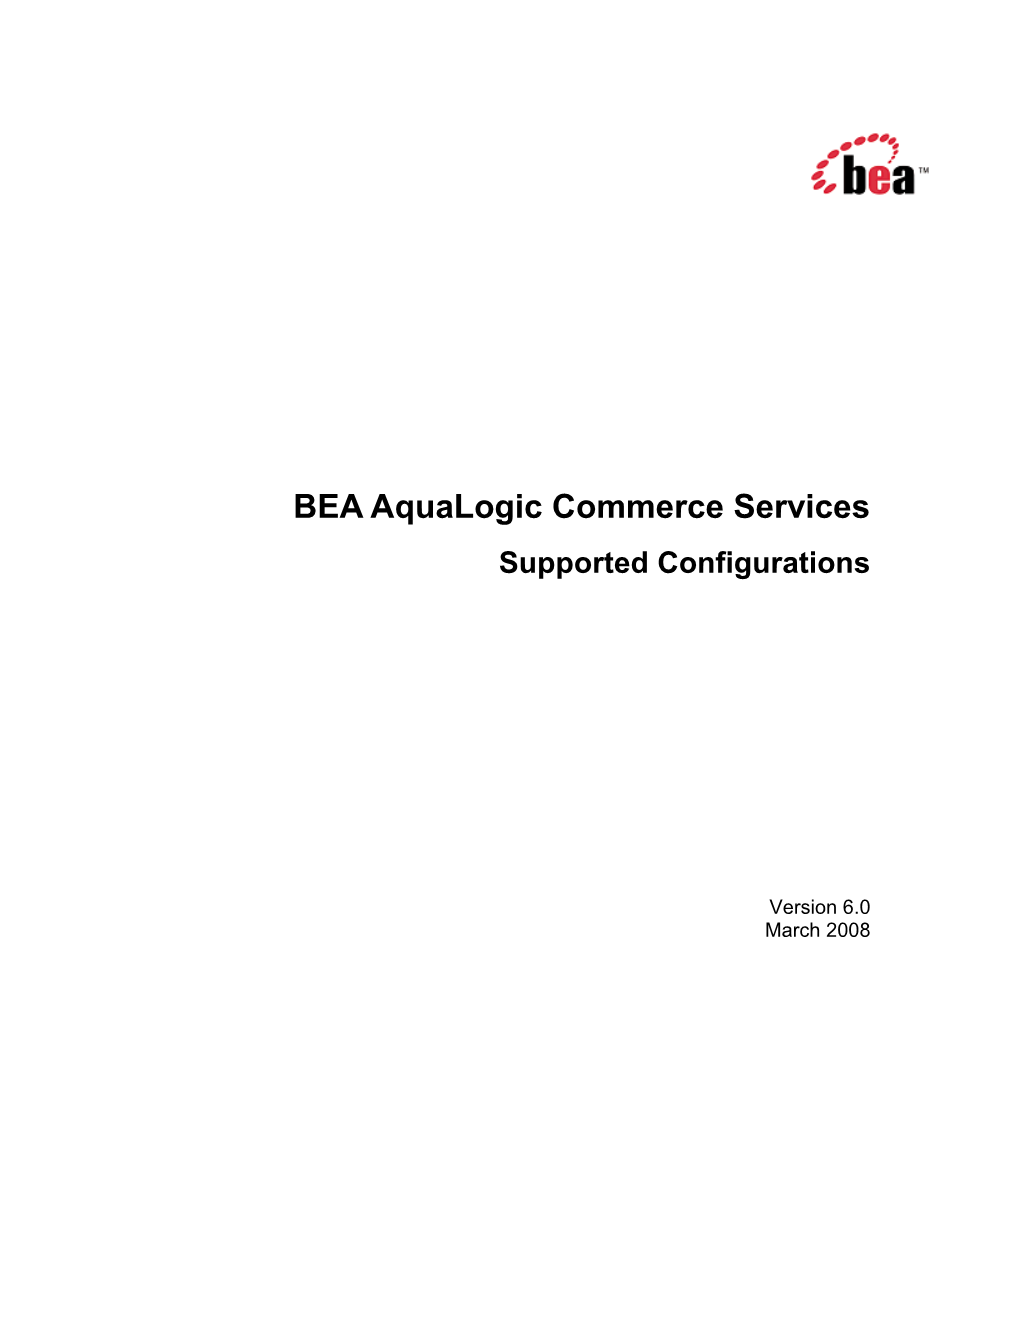 BEA Aqualogic Commerce Services Supported Configurations